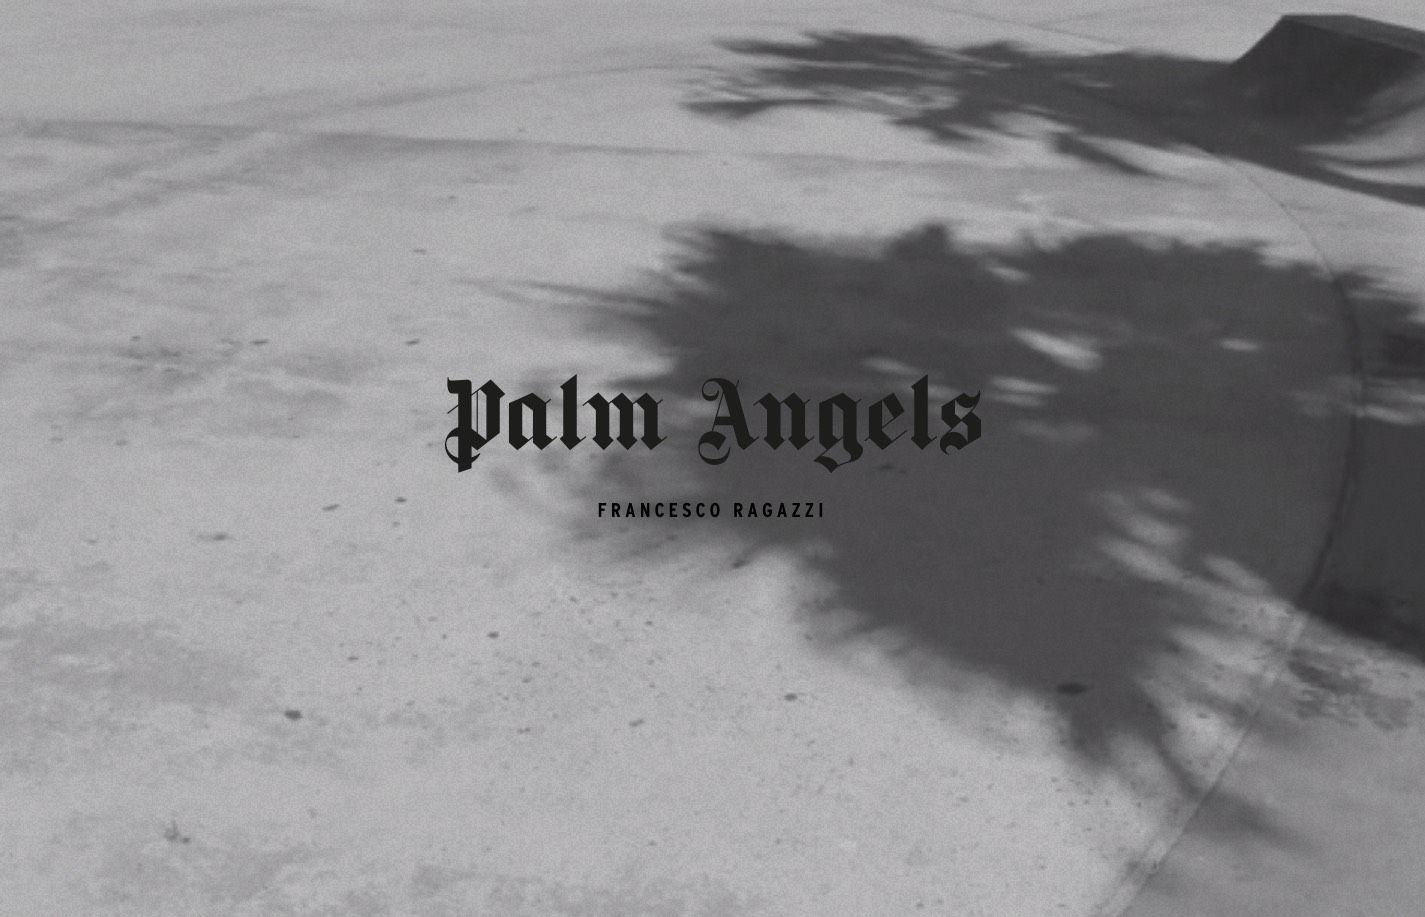 Palm Angels Wallpapers  Top Free Palm Angels Backgrounds  WallpaperAccess